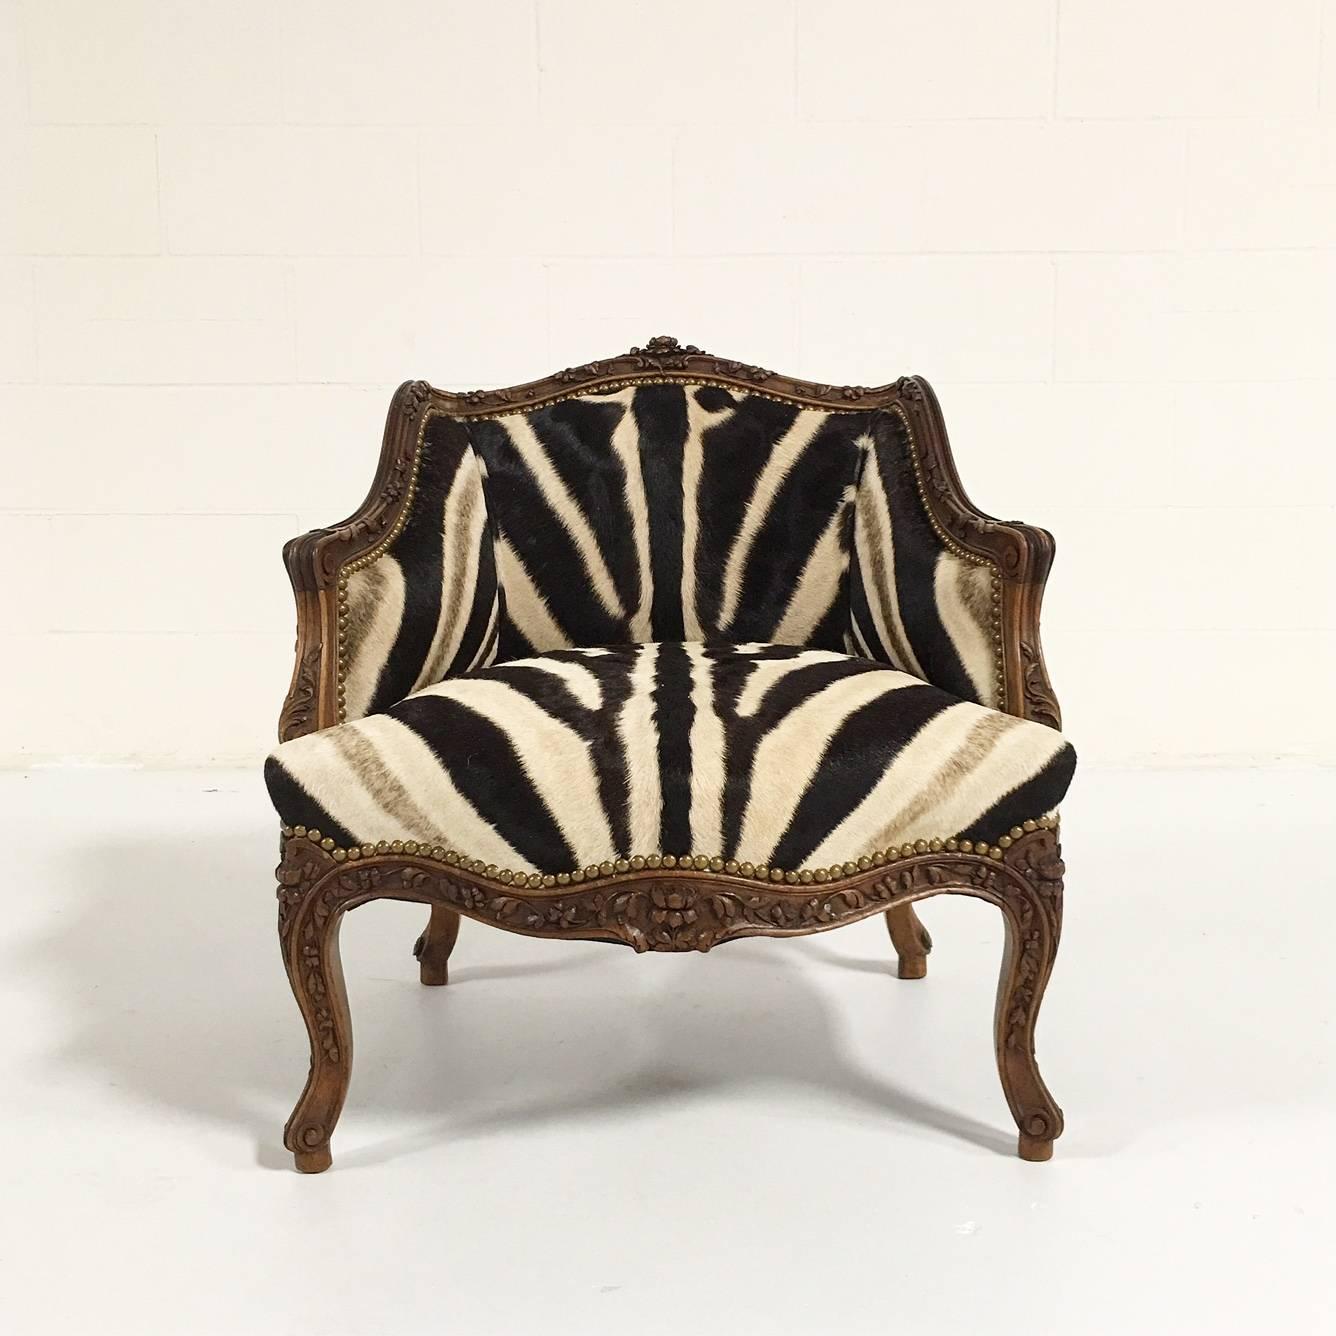 This petite chair is a conversation piece! The intricate carving with rose motifs pairs perfectly with the textured zebra hide upholstery and brass nail heads. We picture this darling thing in a dressing room or bathroom or even in the corner of the